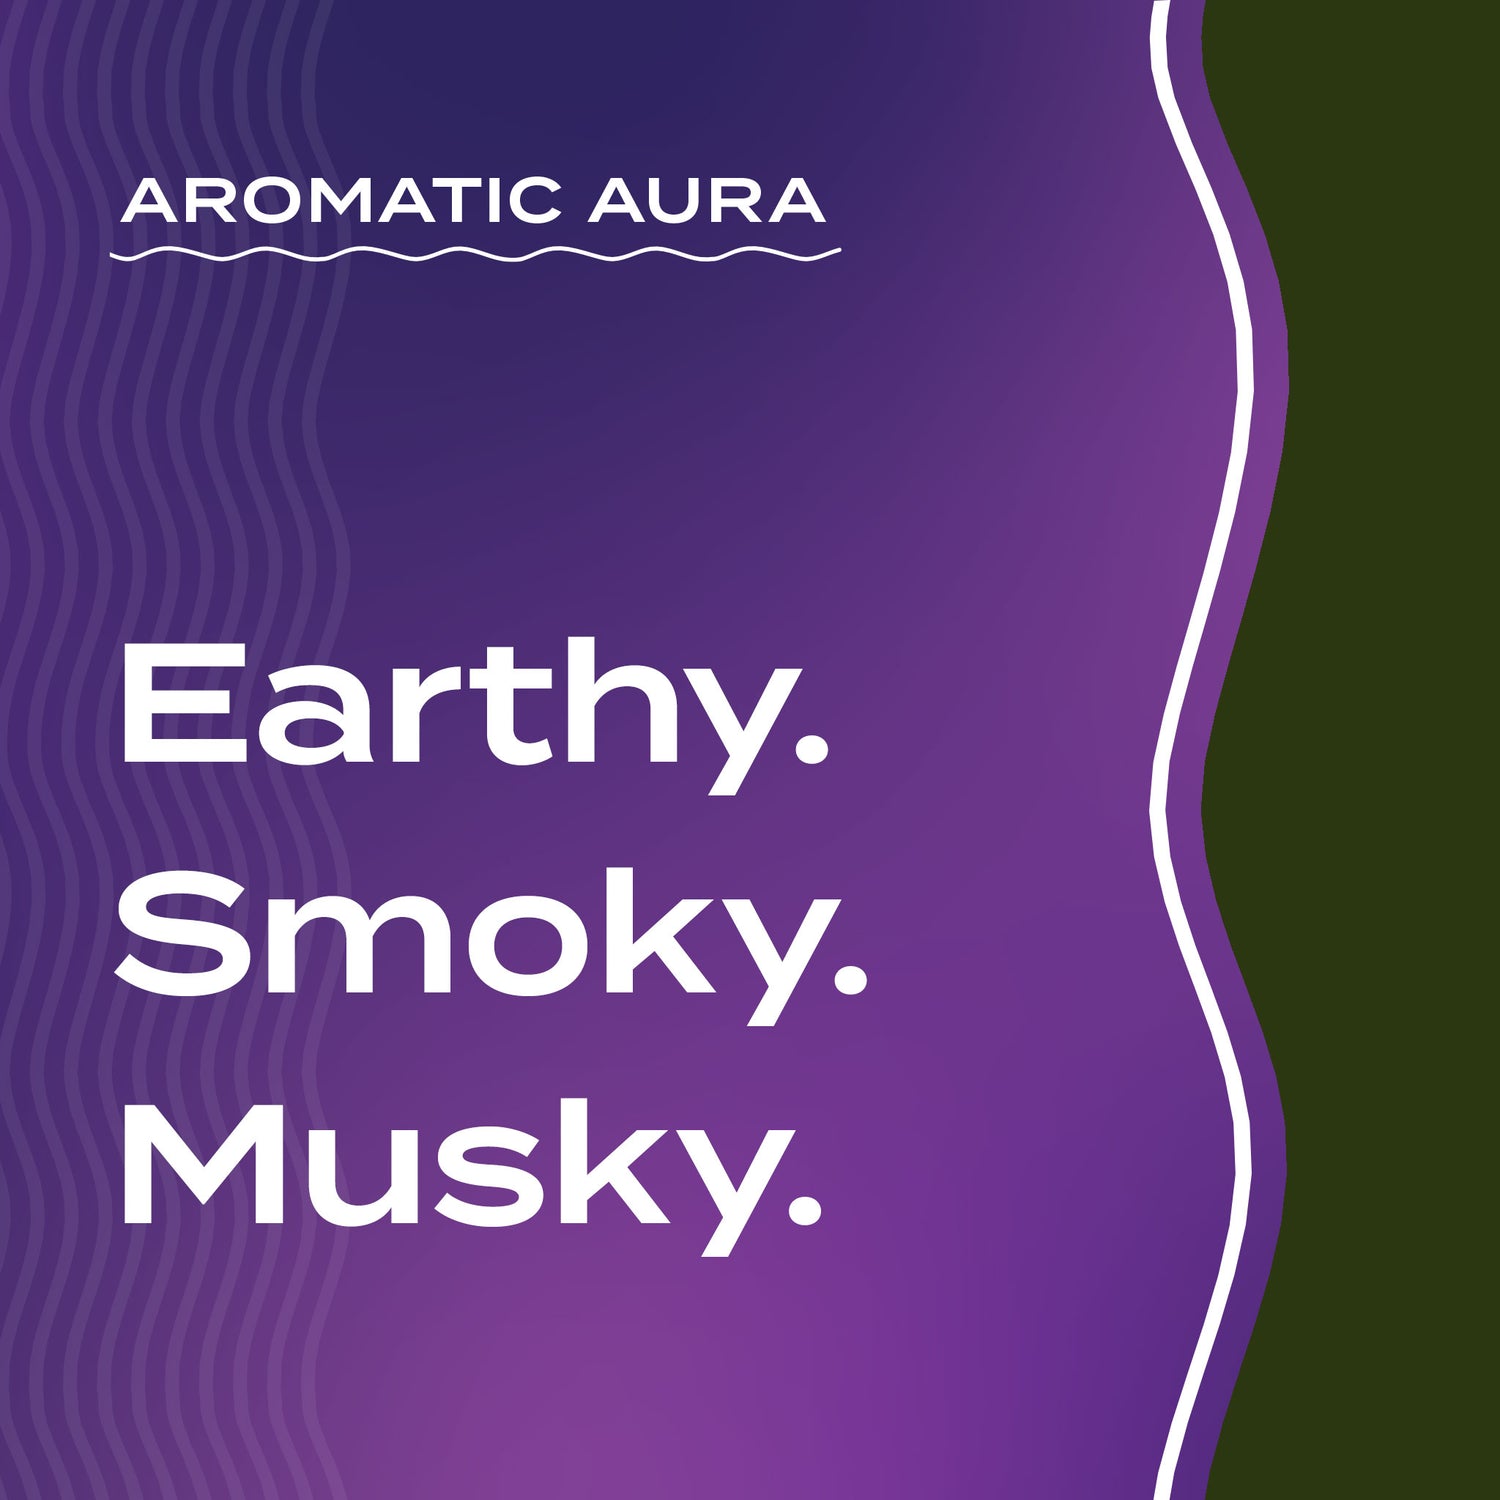 Text graphic depicting the aromatic aroma of Vetiver: Earthy, Smoky, Musky.